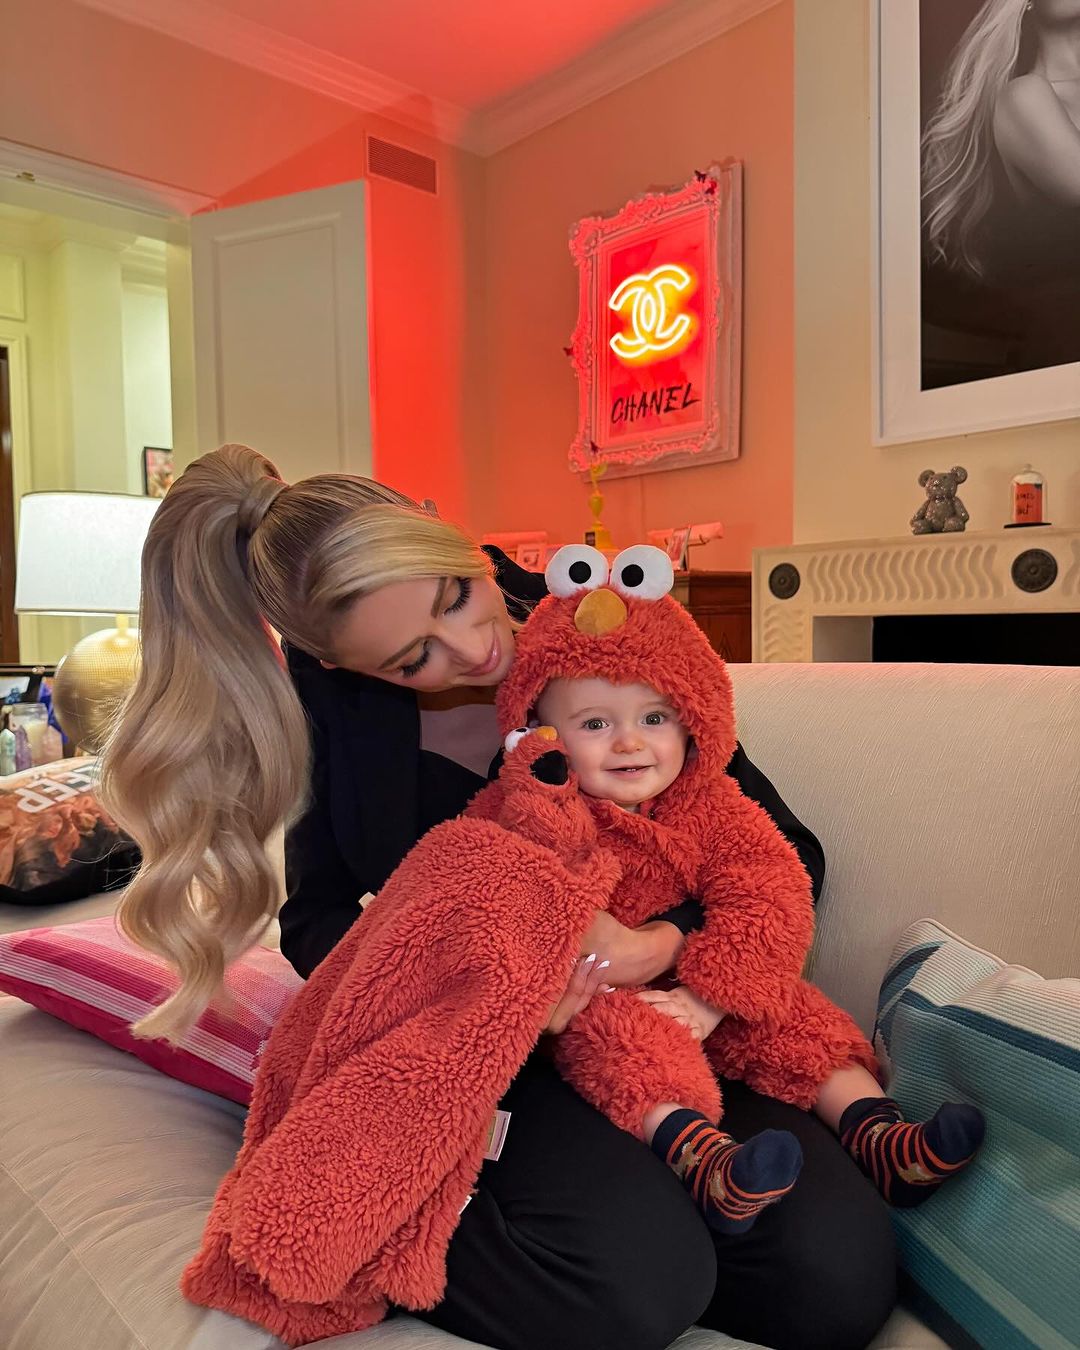 Paris Hilton attended the GQ Men of the Year Awards in Los Angeles last Thursday (16). During the event, she shared with People Magazine her immense happiness with motherhood, highlighting her obsession with Phoenix Barron, her son. (Photo;Instagram)